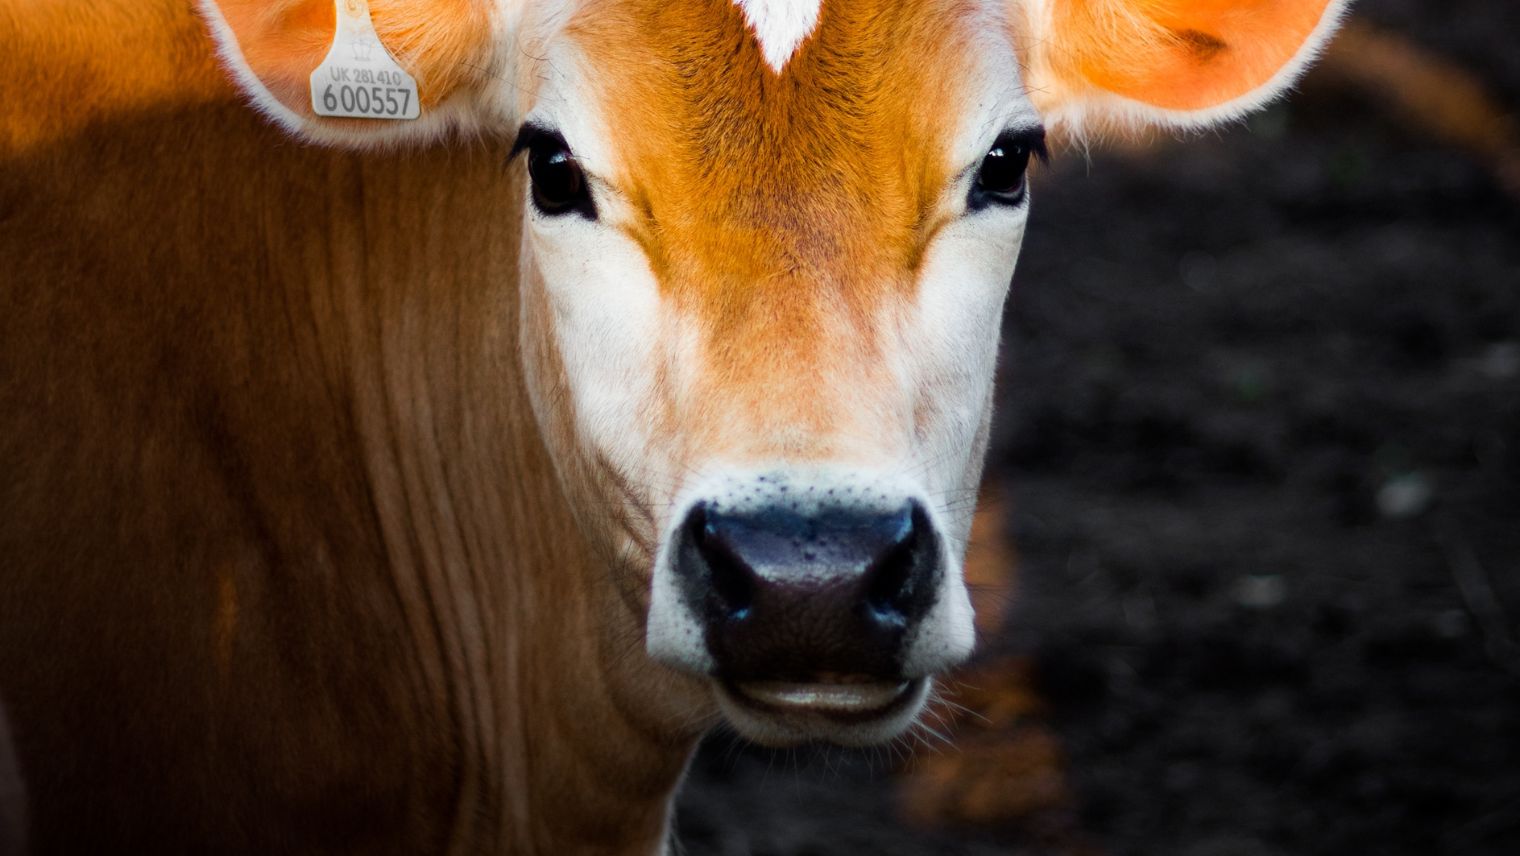 Image of a cow